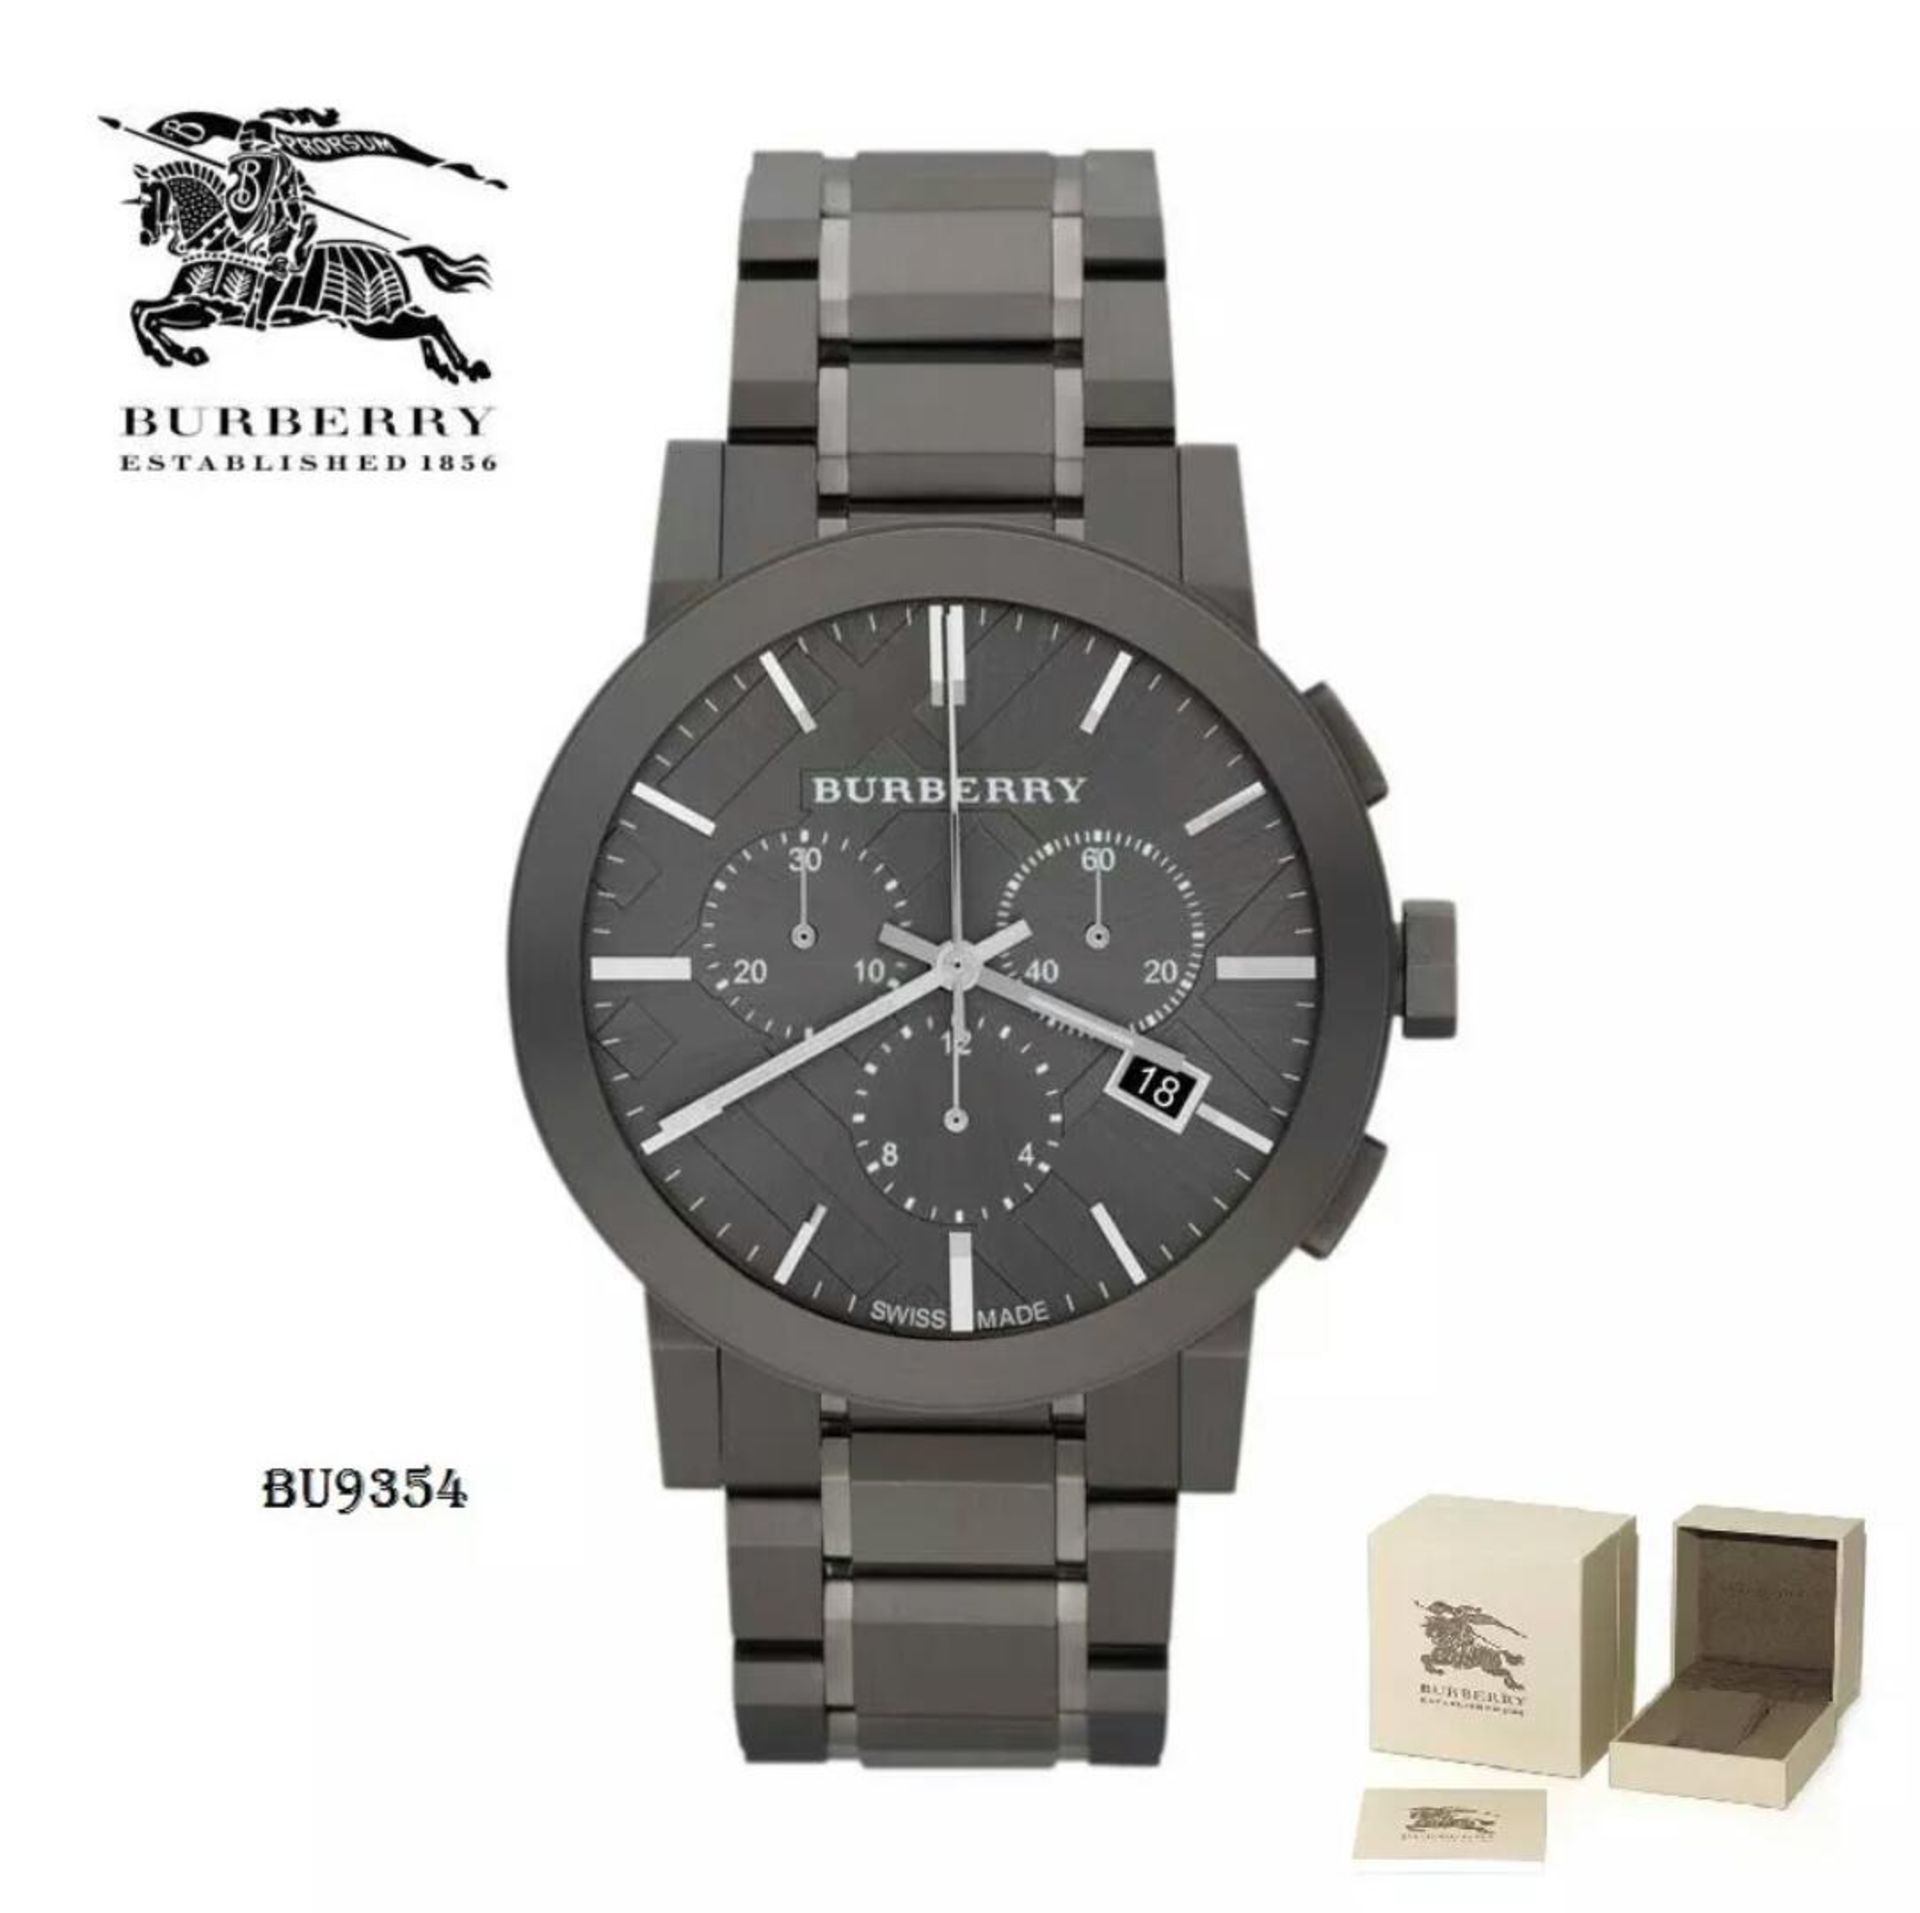 BRAND NEW BURBERRY BU9354,GENTS LARGE CHECK GREY ION PLATED STAINLESS STEEL CHRONOGRAPH WAT - RRP £